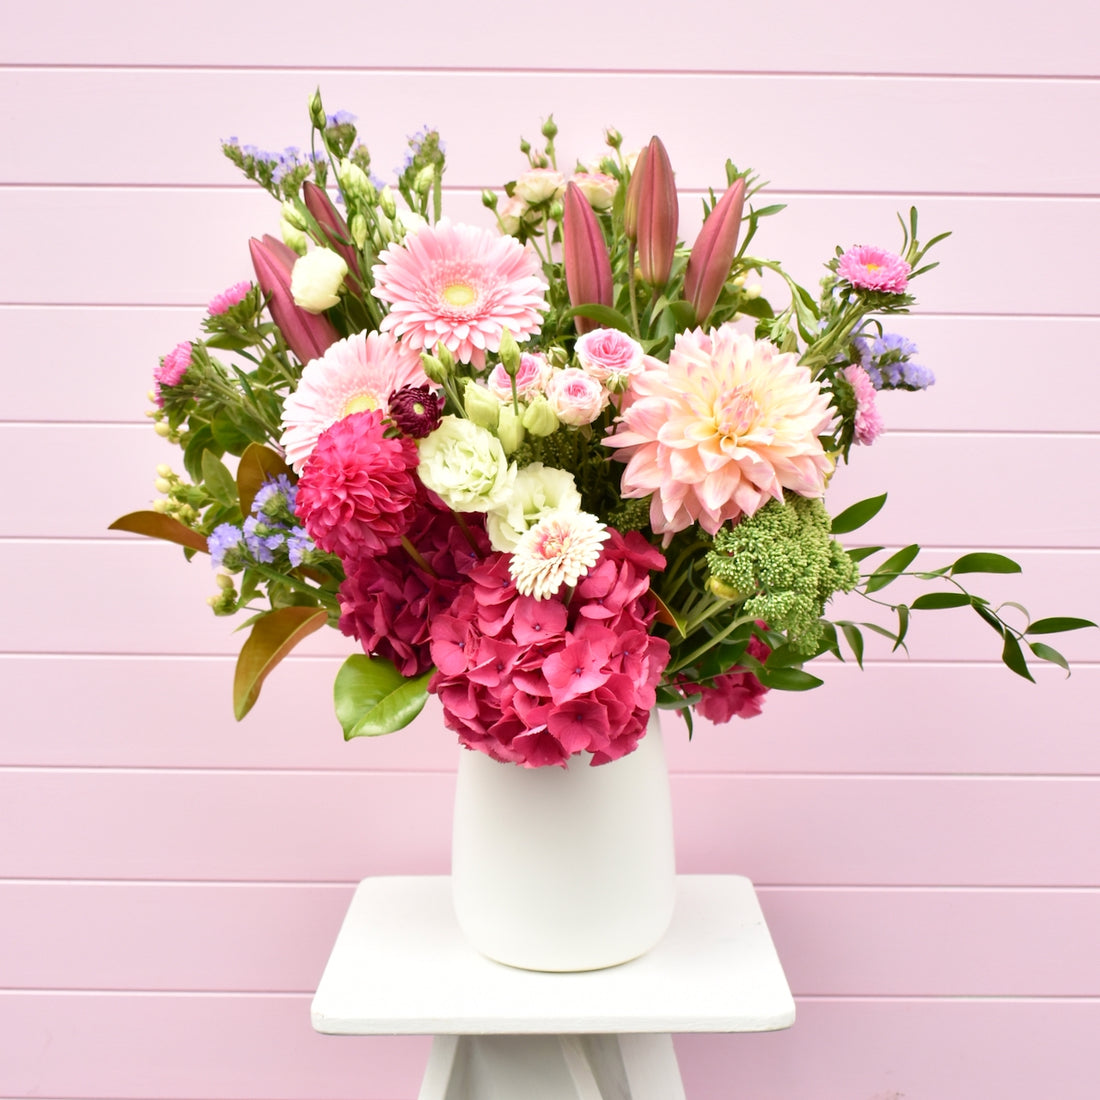 A white table holding a large pink and white flower arranagement